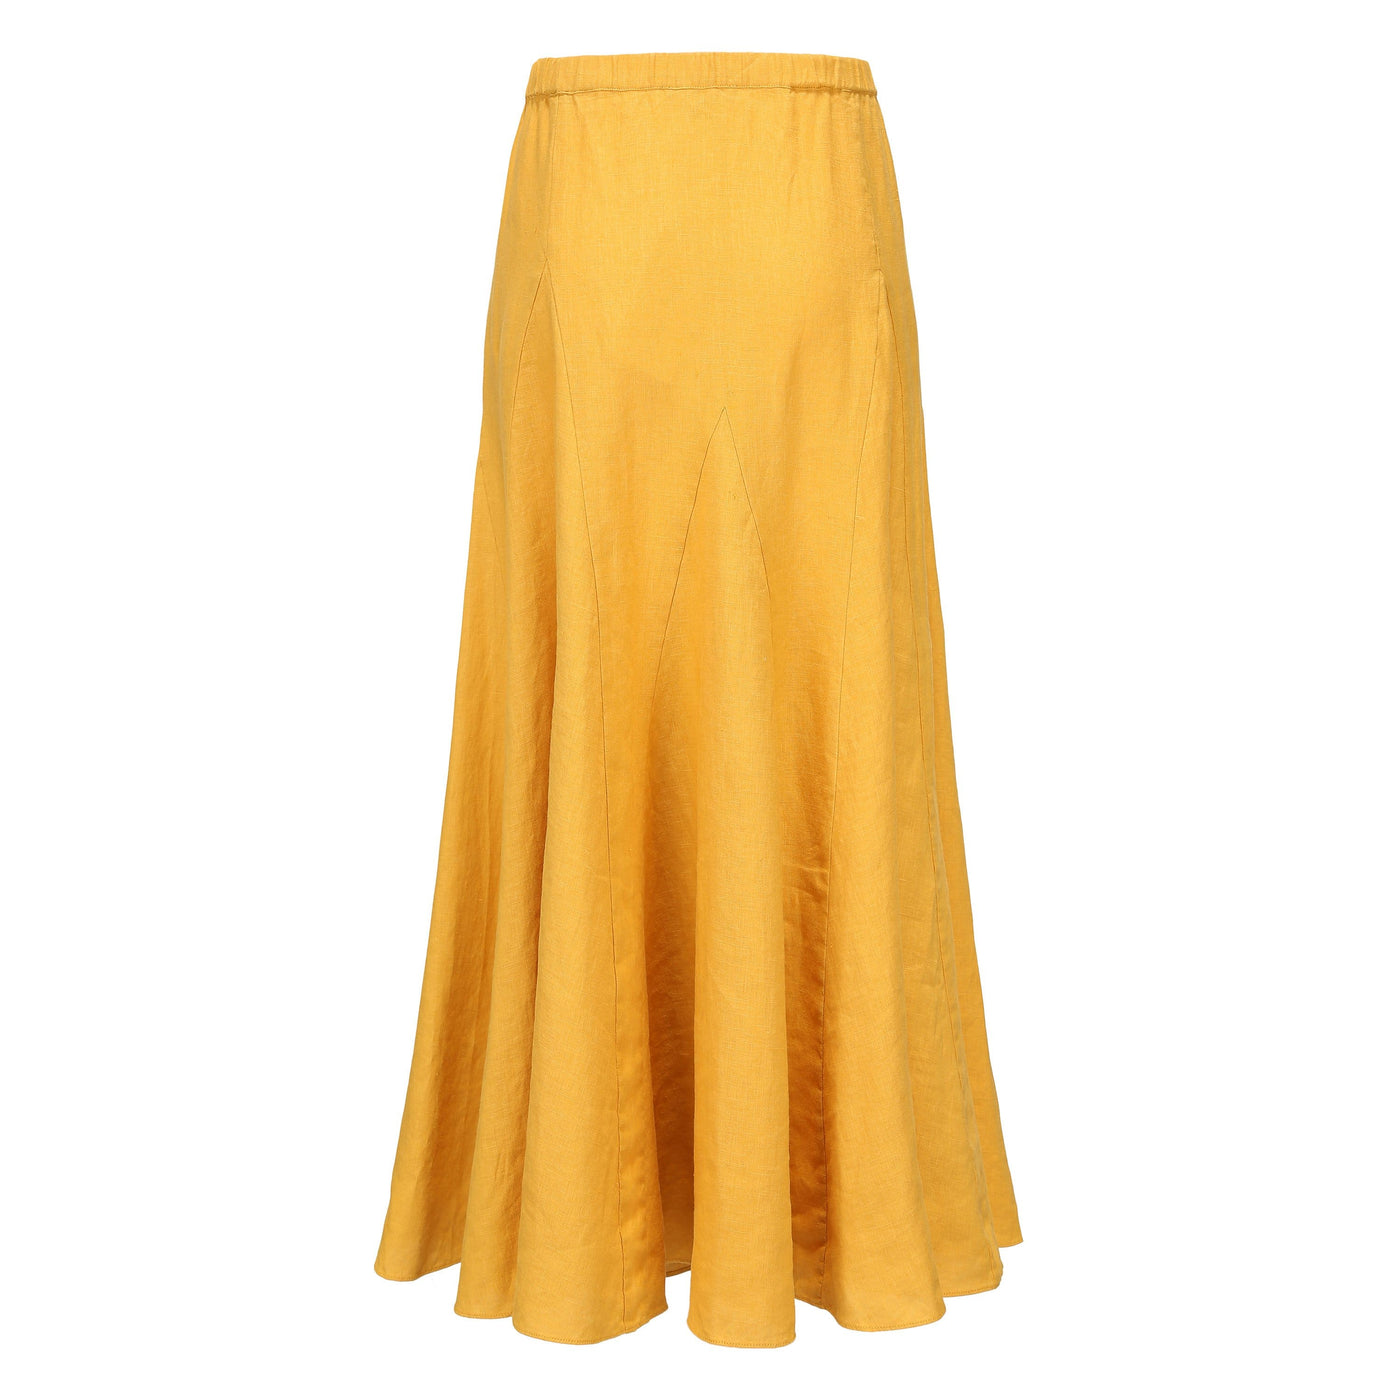 Lilly Pilly Collection 100% organic linen Stella Skirt in Sunflower as 3D image showing back view